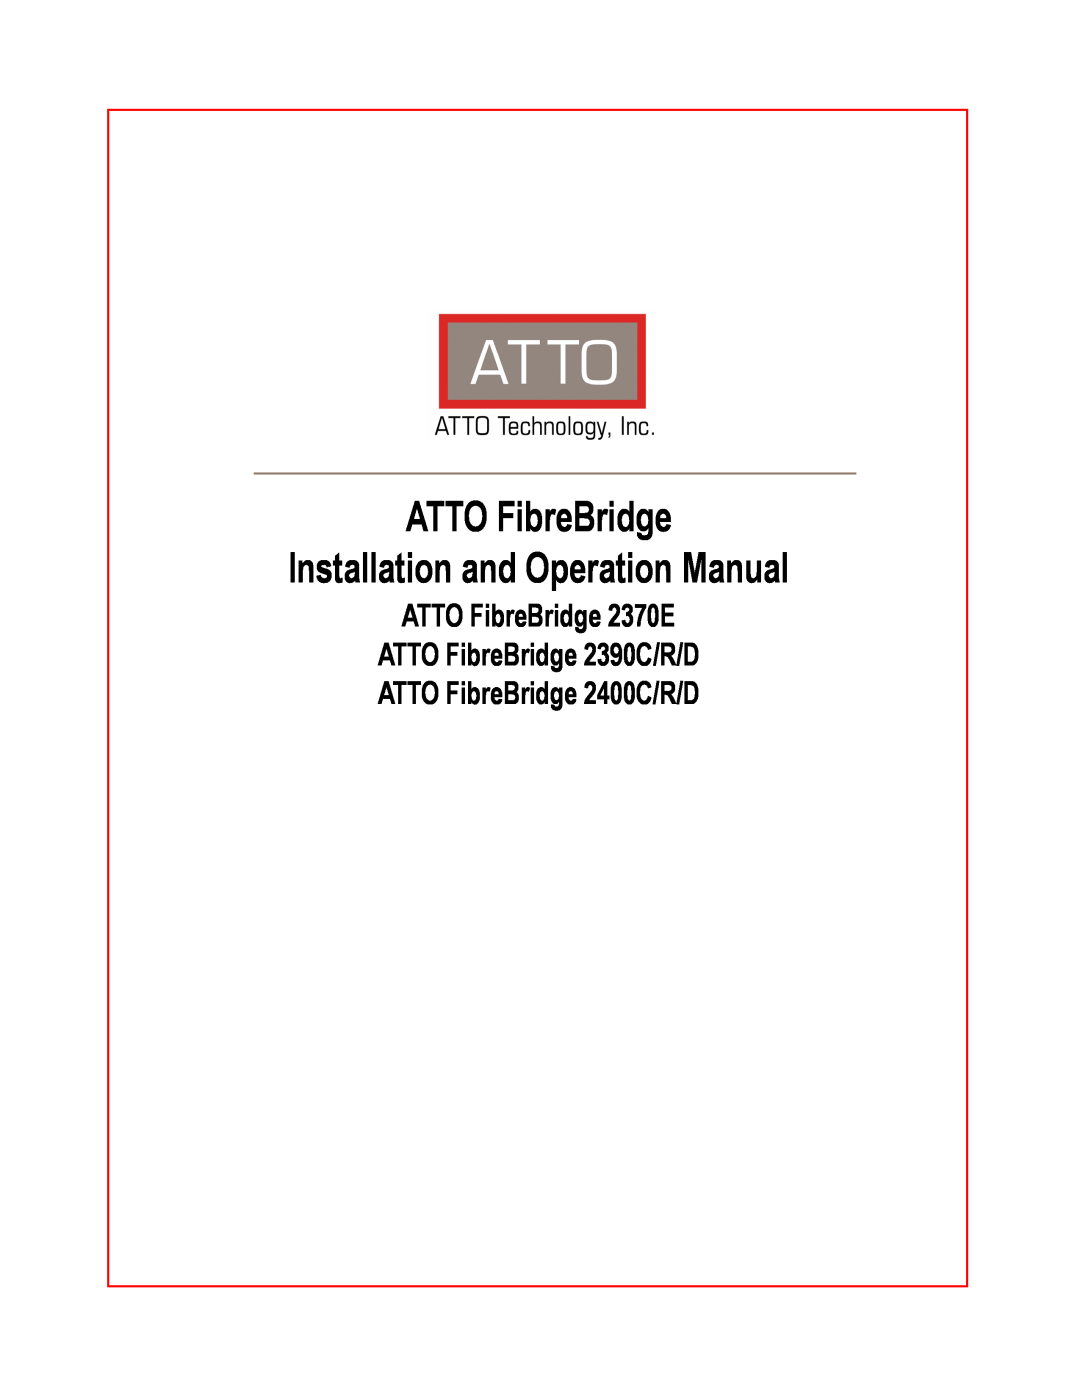 ATTO Technology 2390C/R/D operation manual ATTO FibreBridge Installation and Operation Manual, ATTO FibreBridge 2400C/R/D 